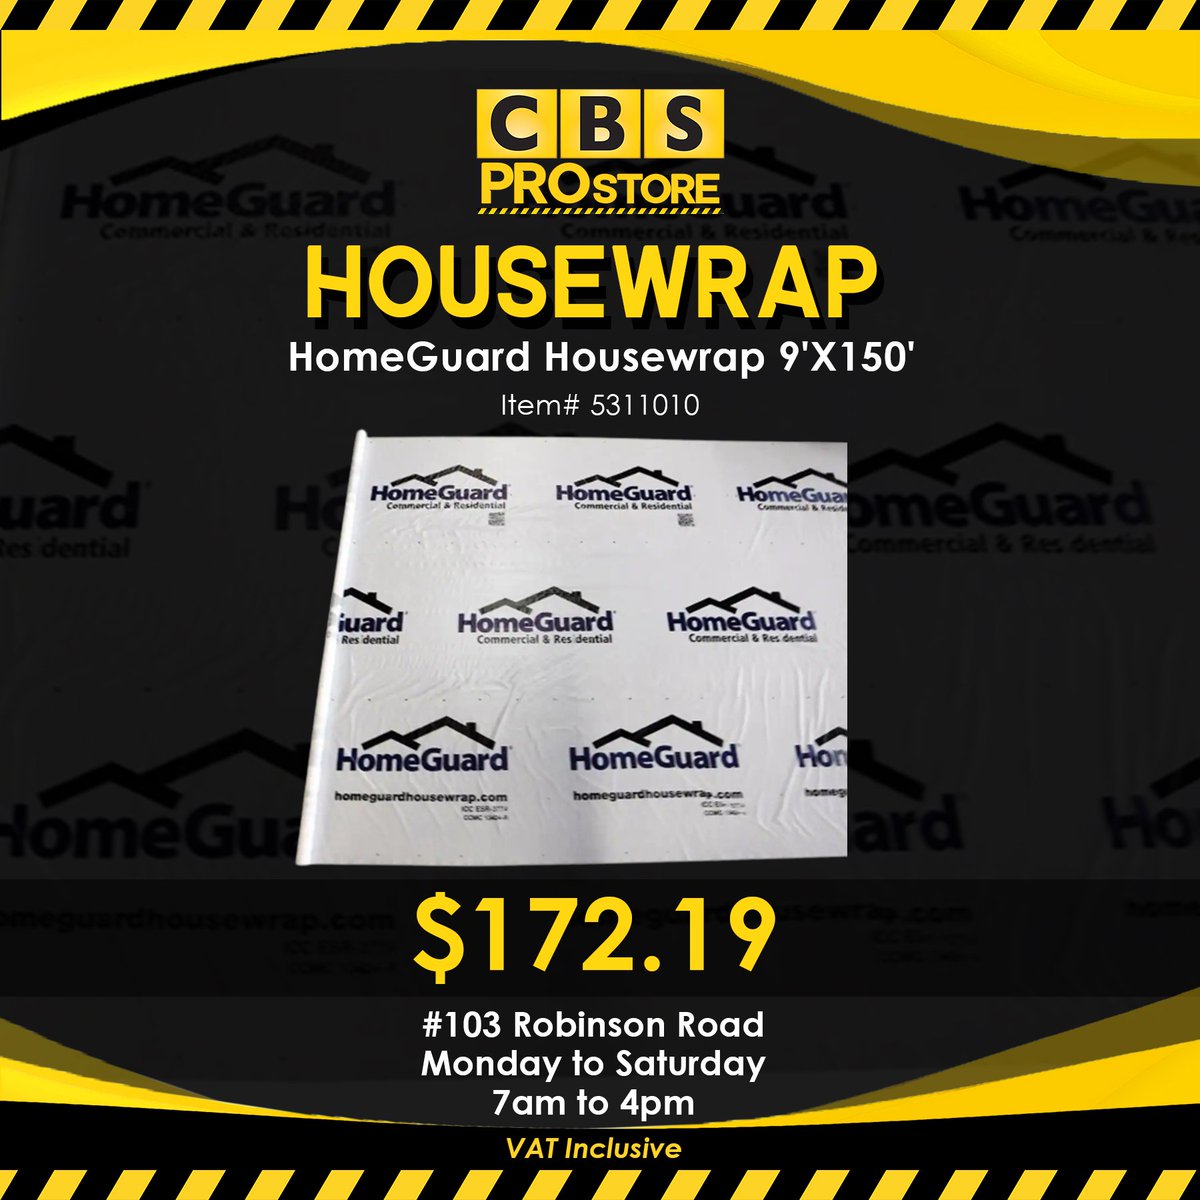 HardiePlanks, HardieTrim and Housewrap are available at the @CBSPROstore on Robinson Road 🛠!

📍 103 Robinson Road
🕖 Mon to Sat; 7am to 4pm

#CBSPRO #buildbeautiful